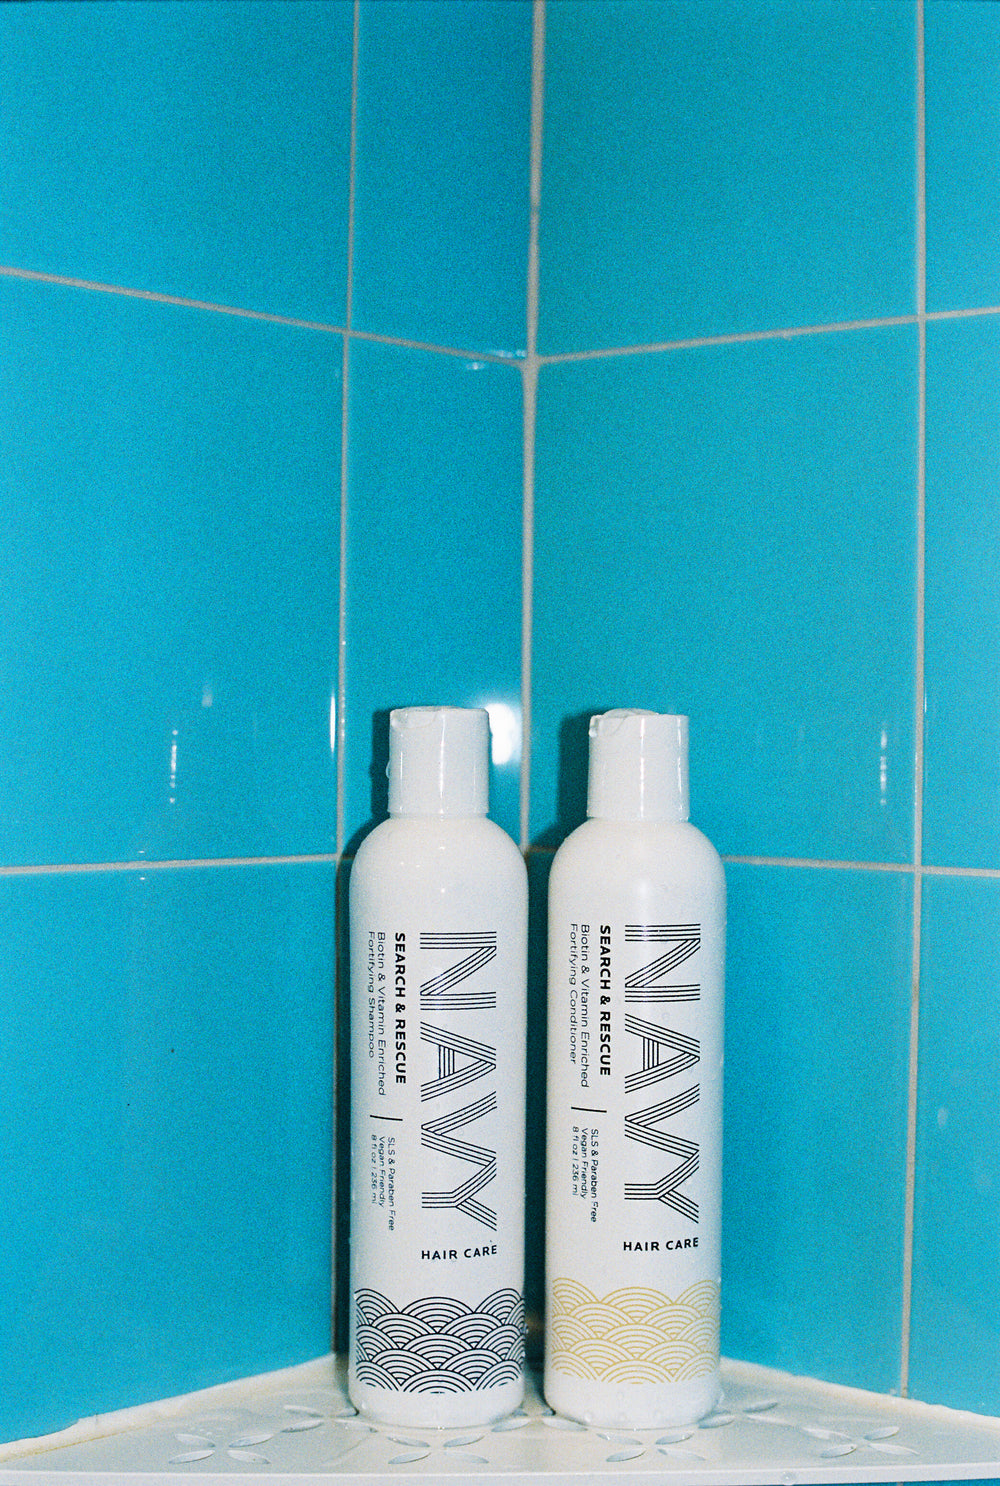 NAVY HAIR CARE The Bwc Flight - One-color